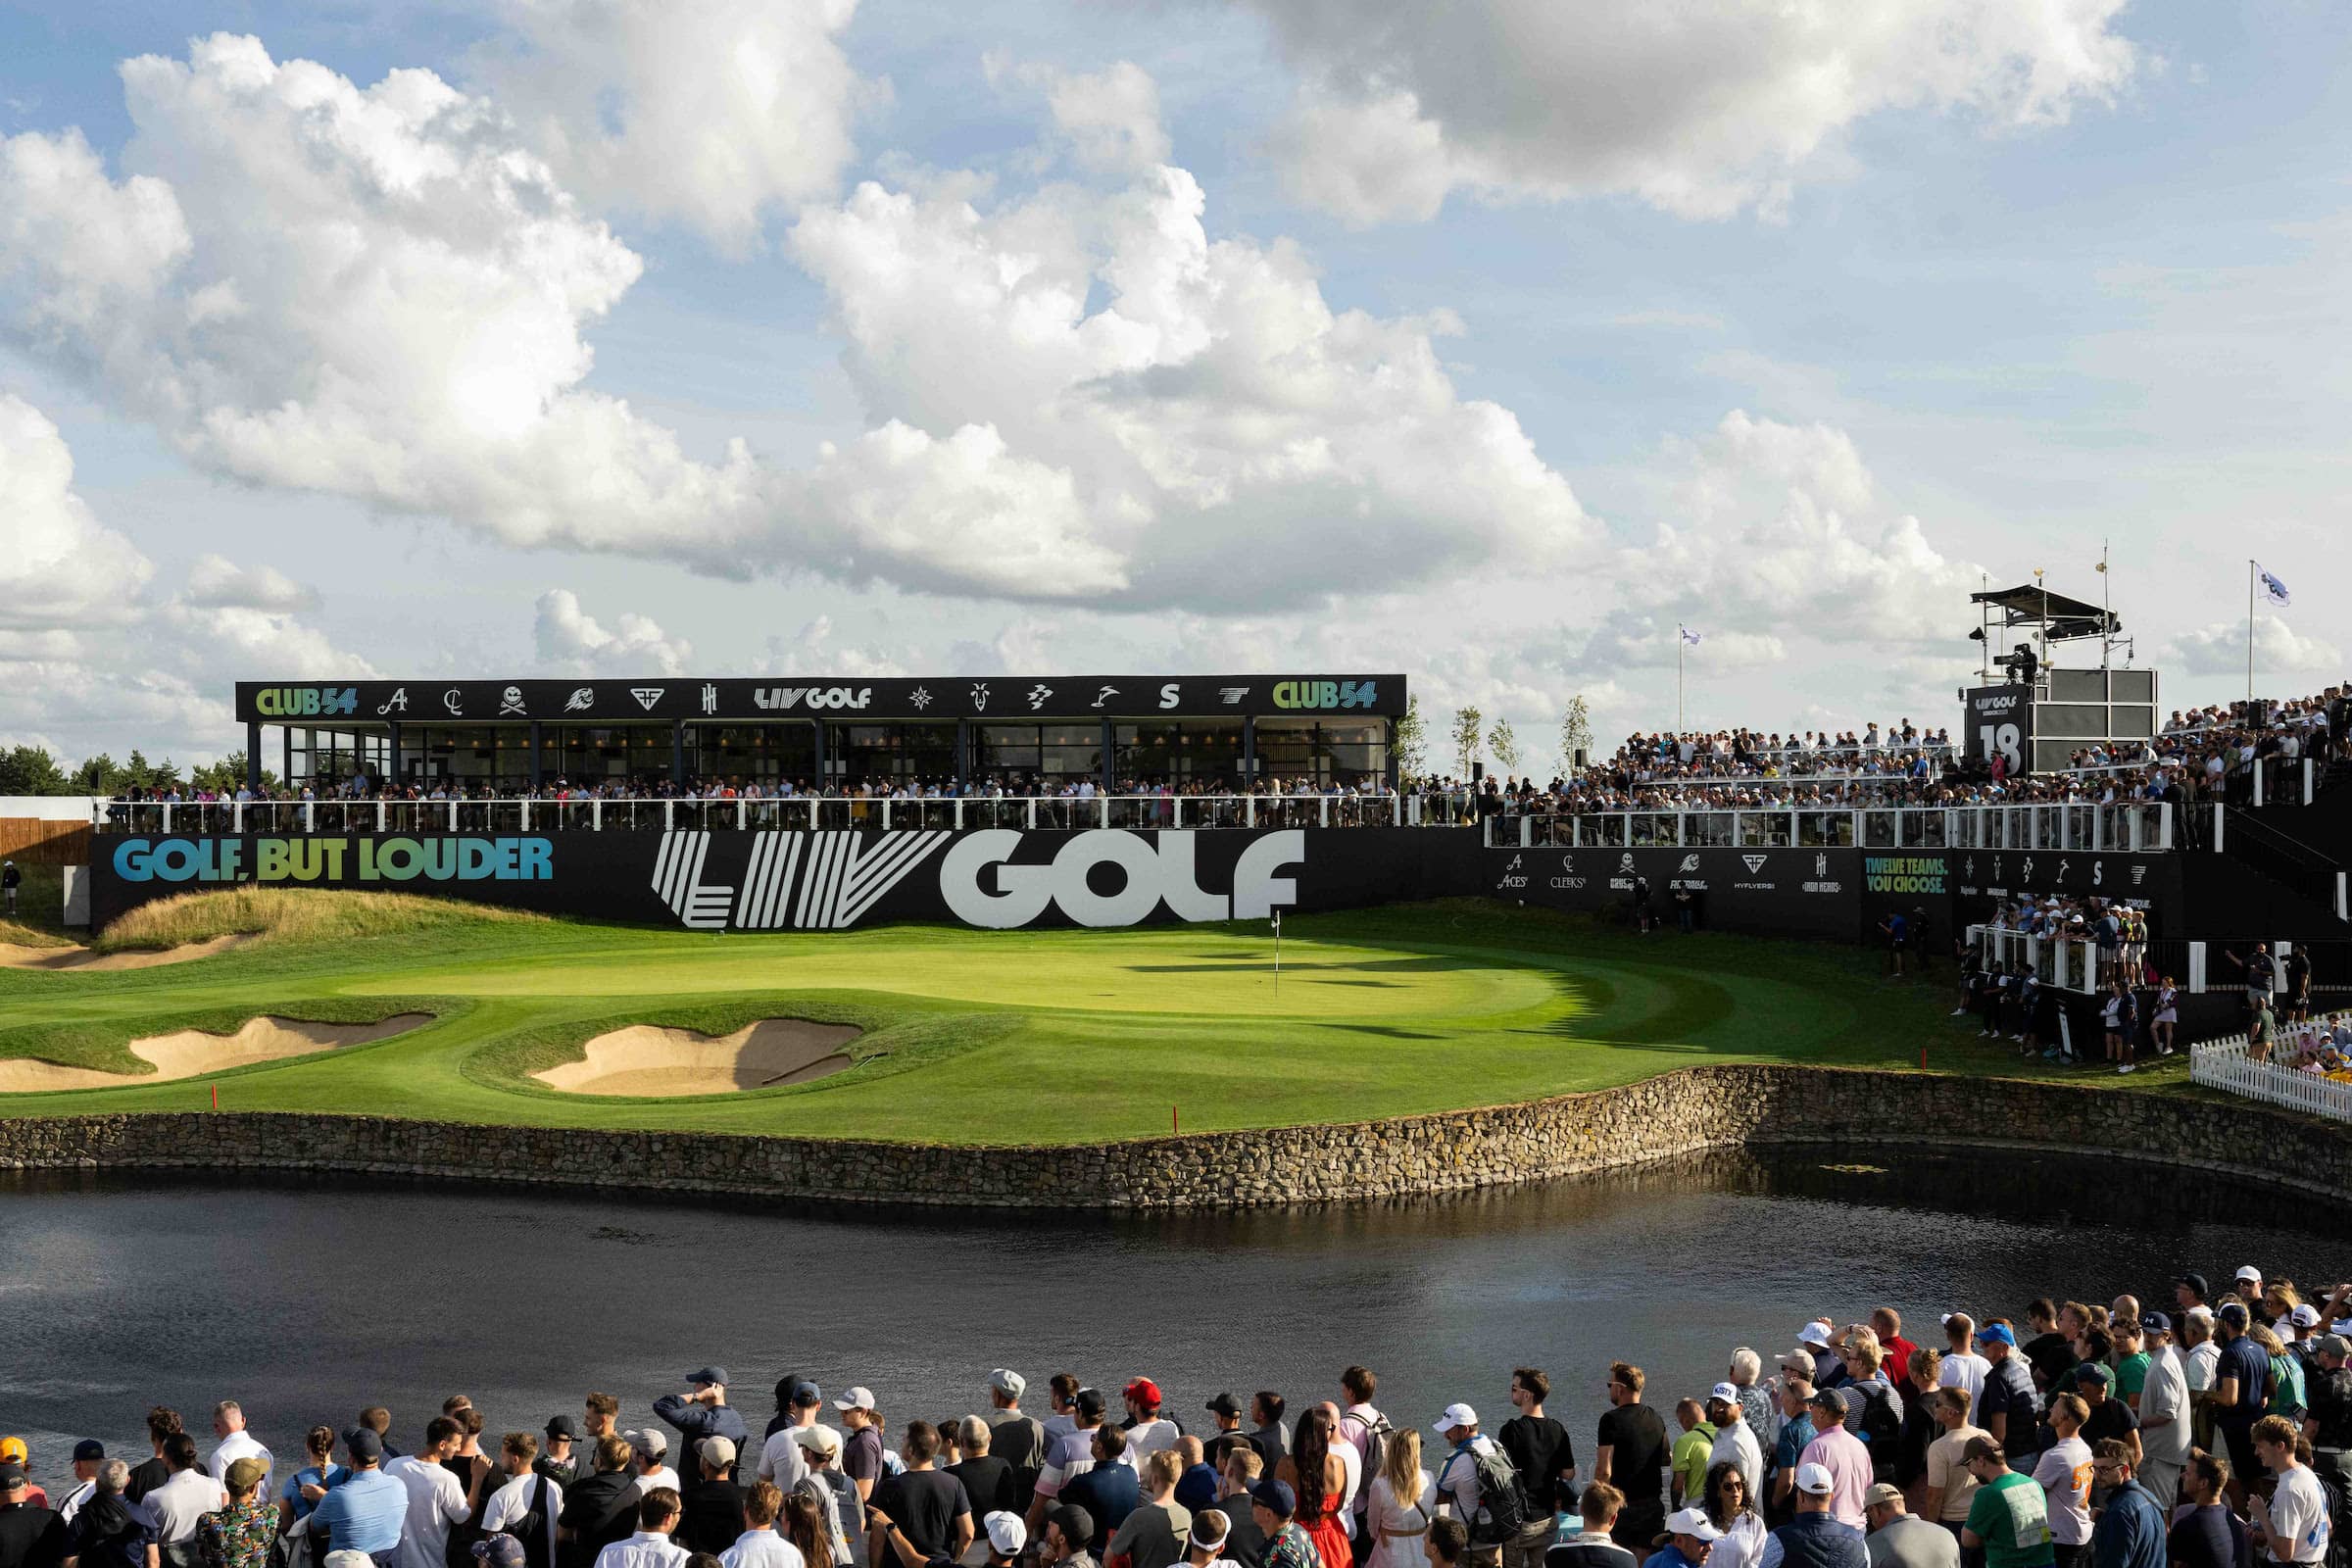 Fans-watched-as-the-leading-group-made-their-way-to-the-18th-green-at-the-Centurion-Club